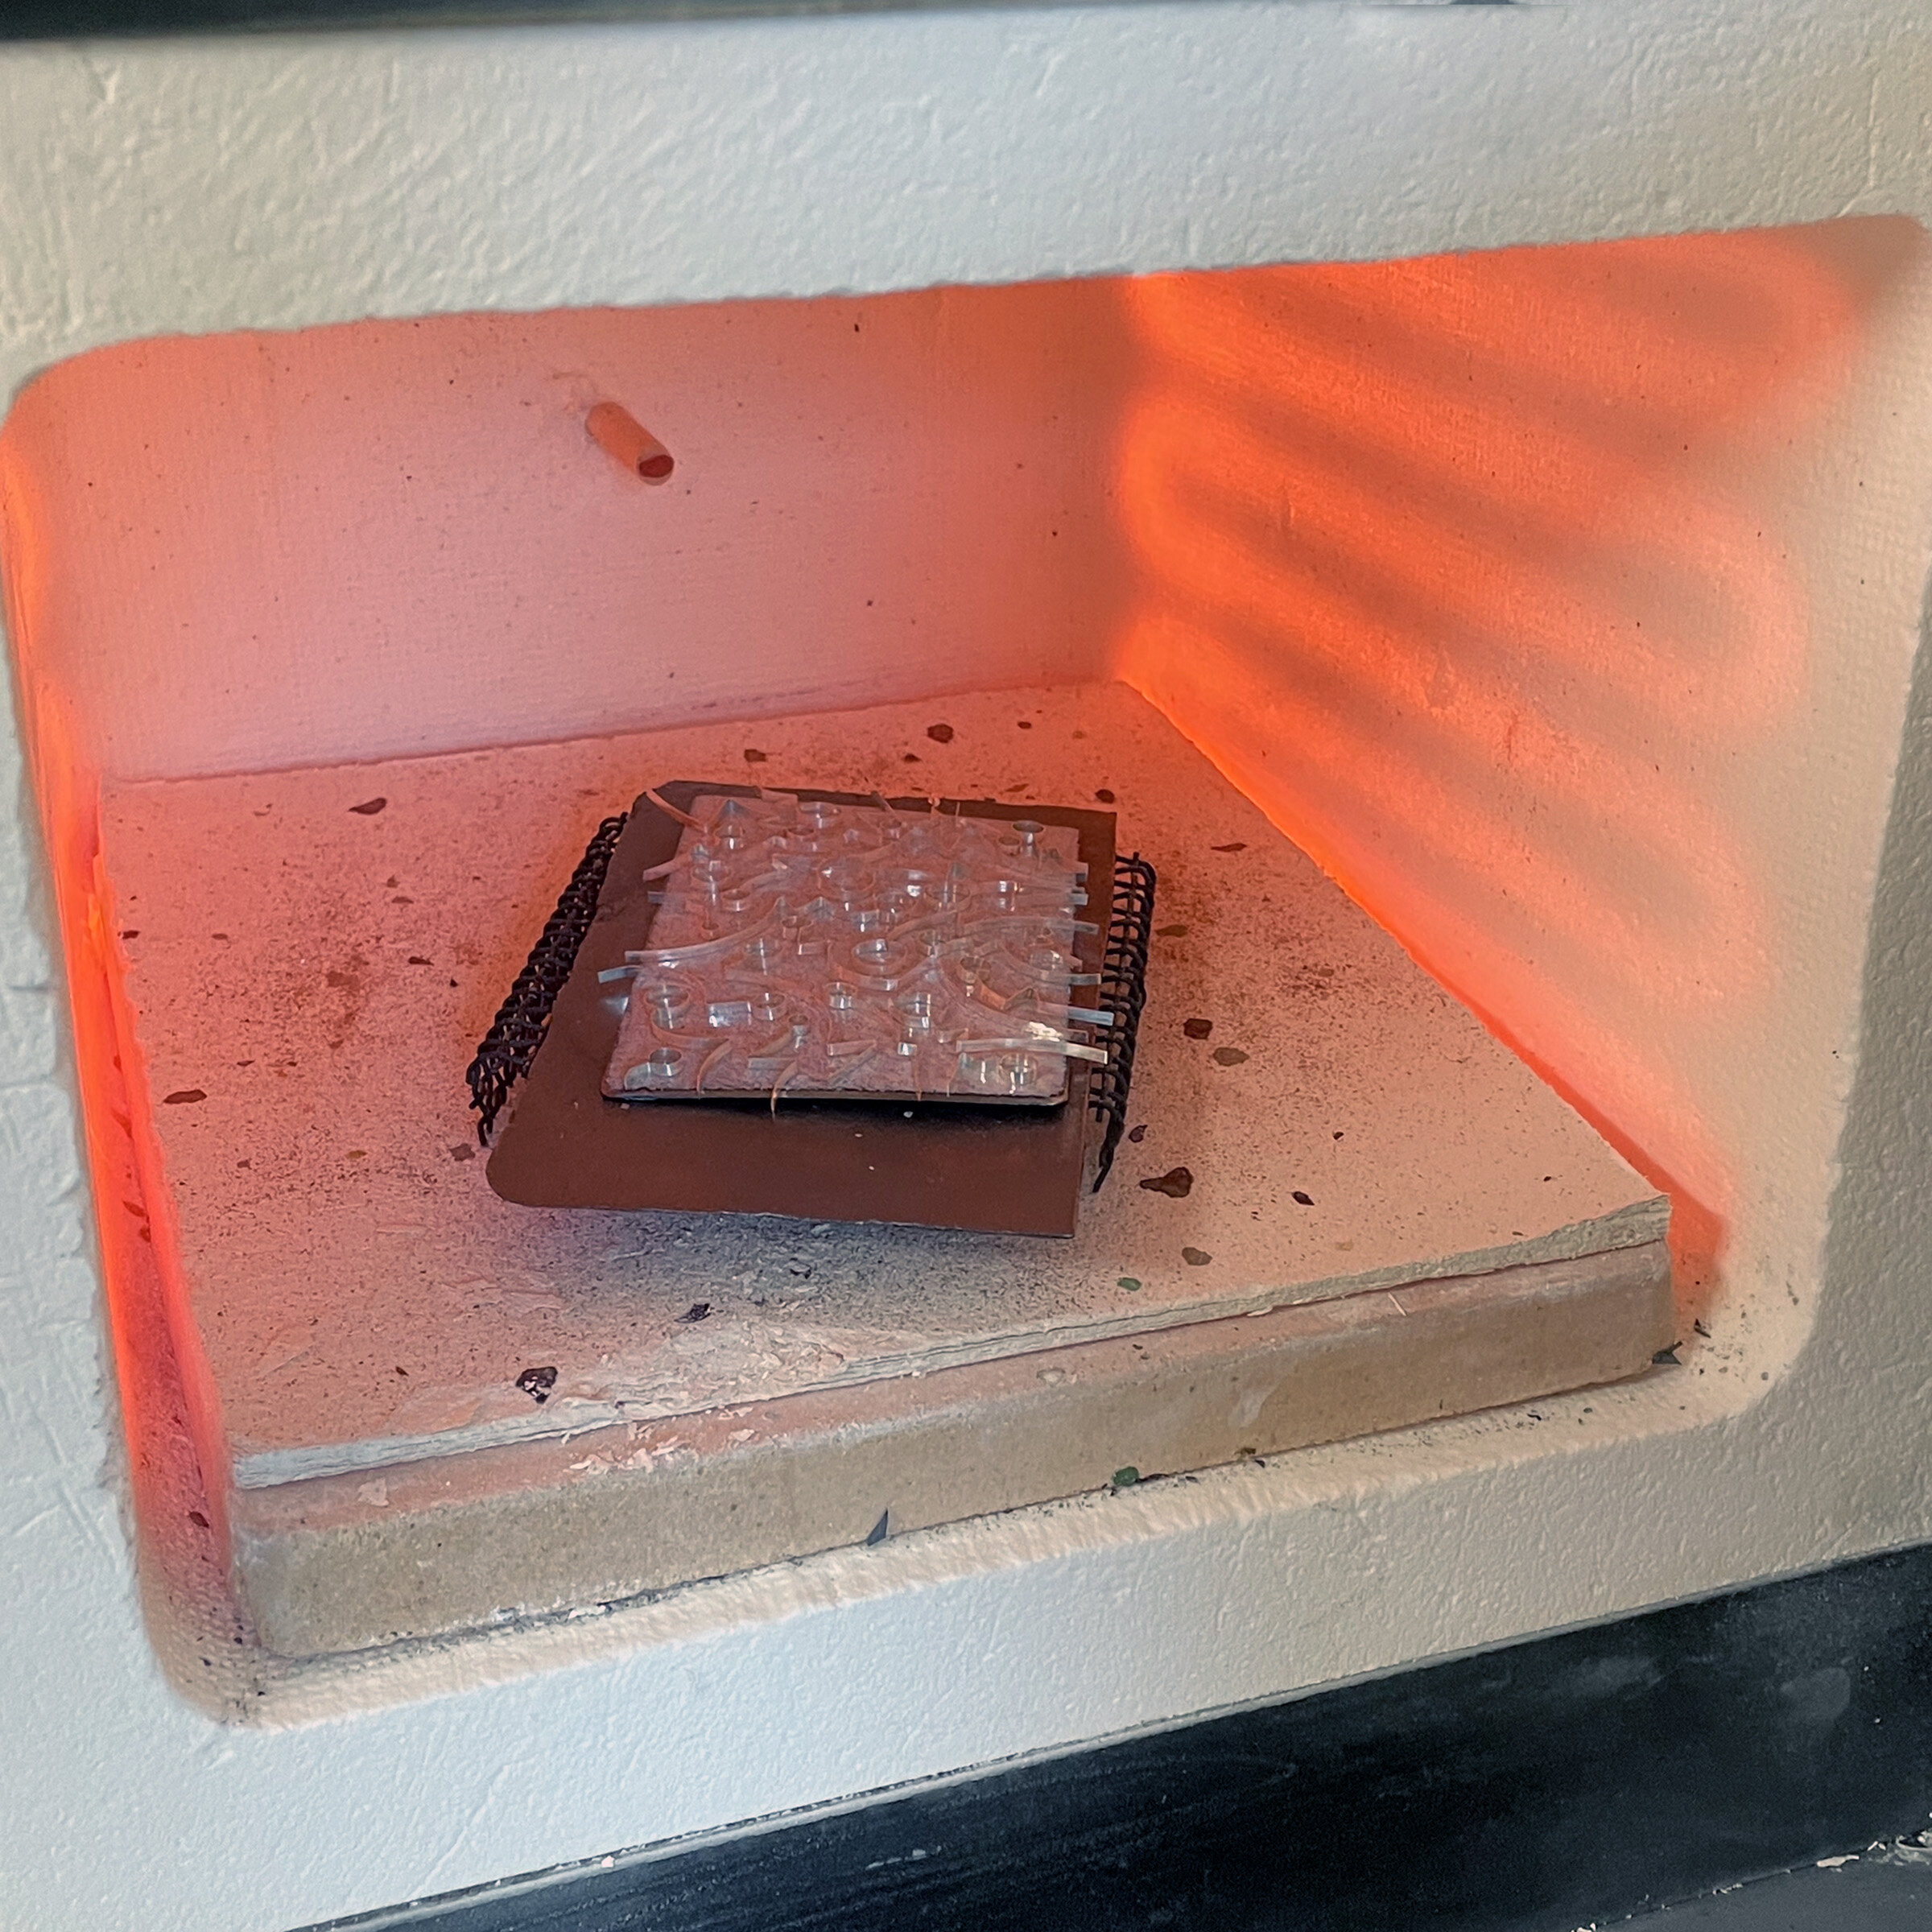  The piece is returned to the kiln, where the glue is burned off, and the melted glass traps the wires. 